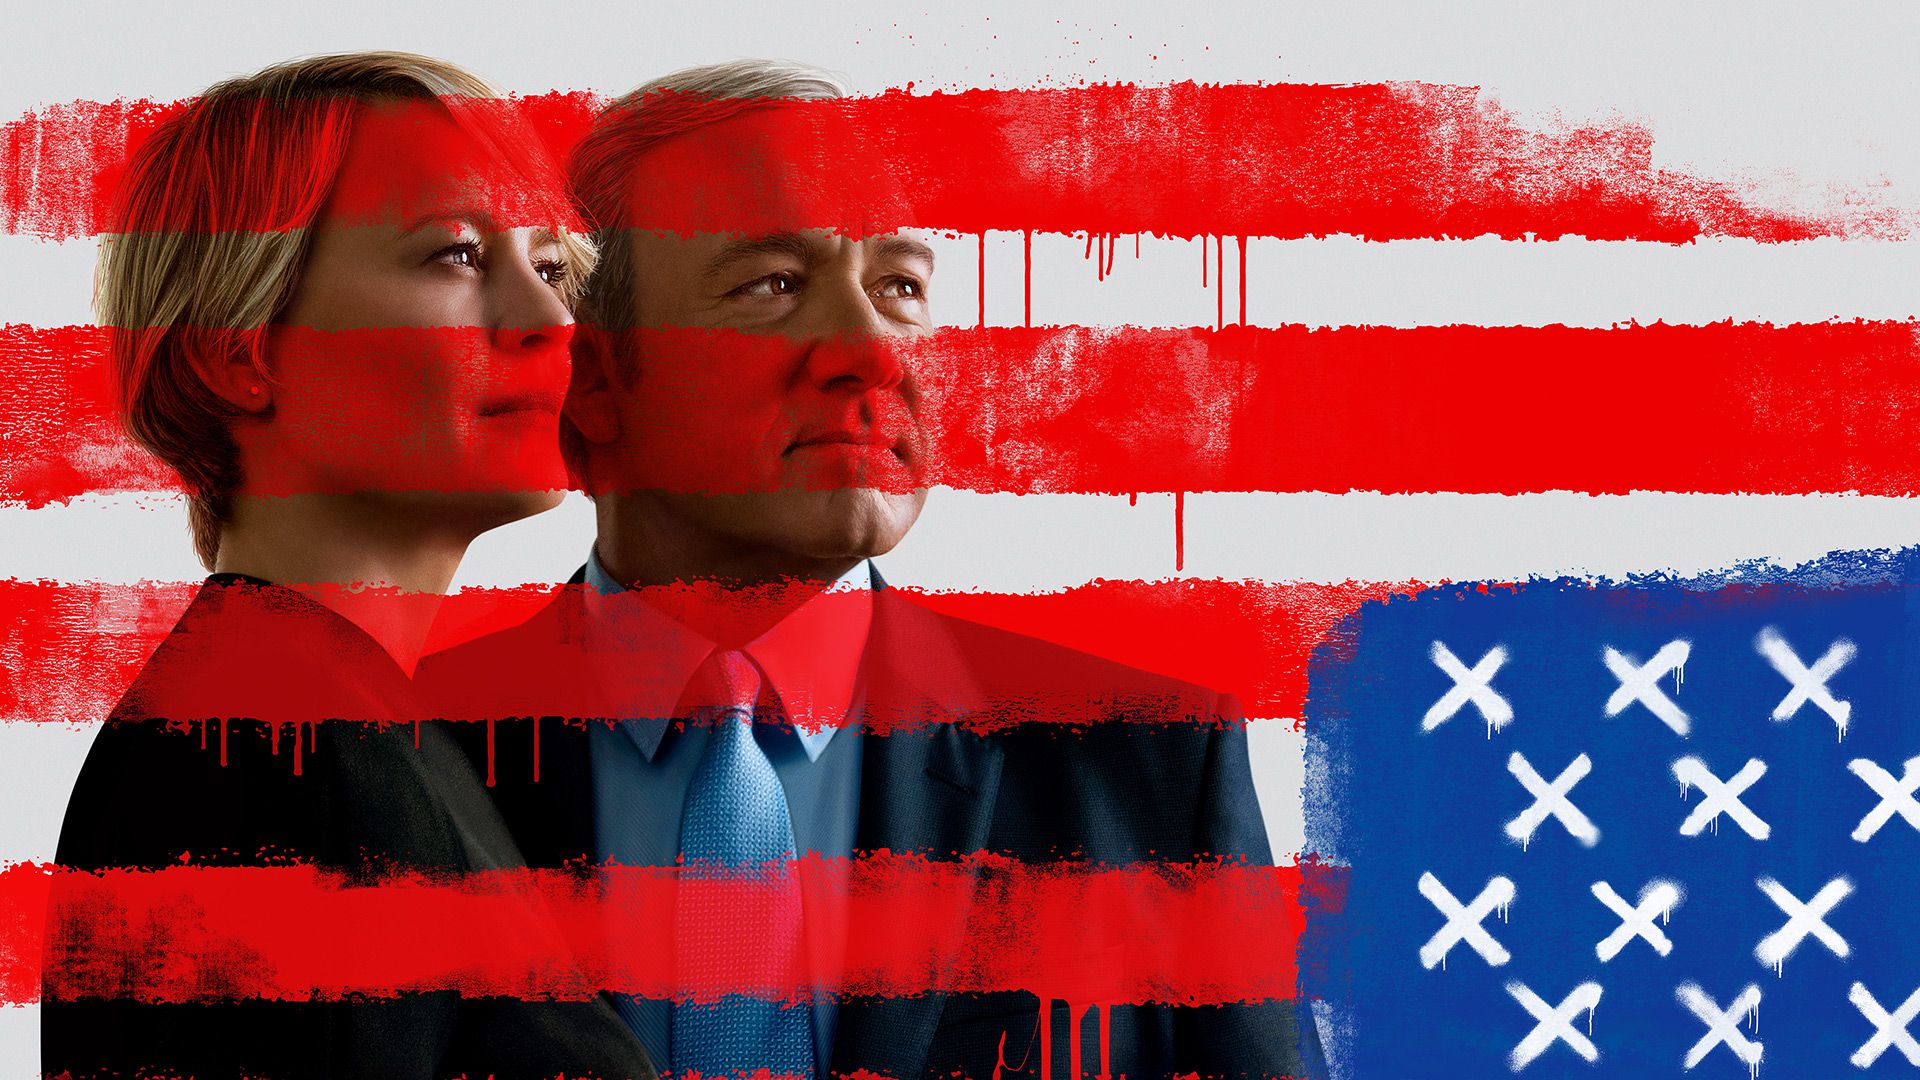 House of Cards background